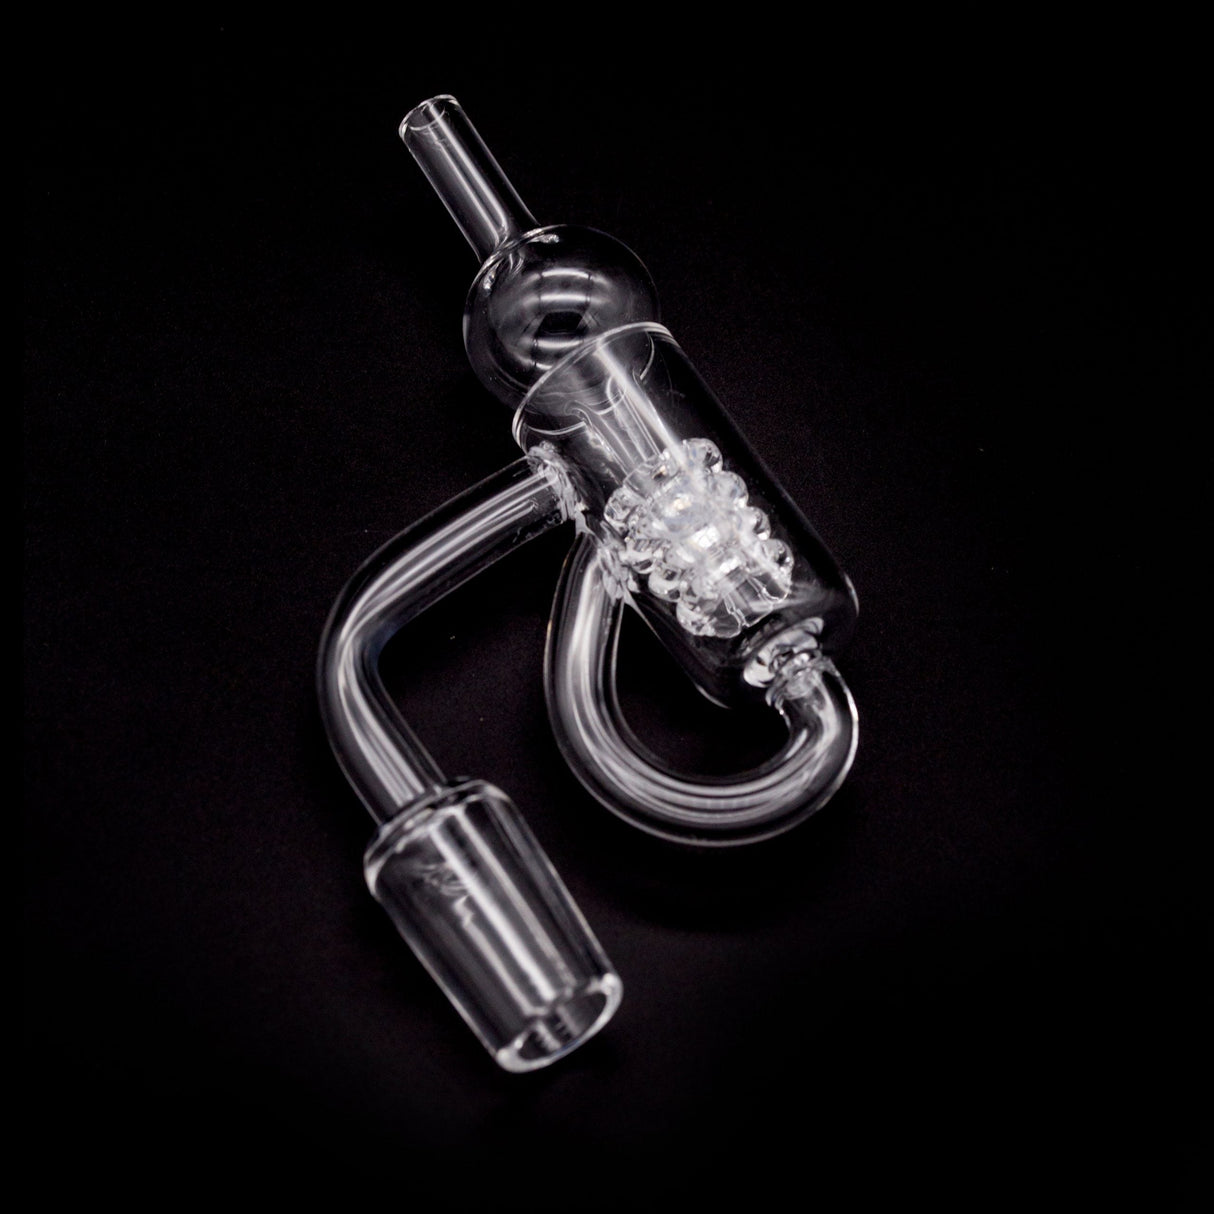 Honeybee Herb Recycler Quartz Banger 18mm Male on black background, angled view, for dab rigs